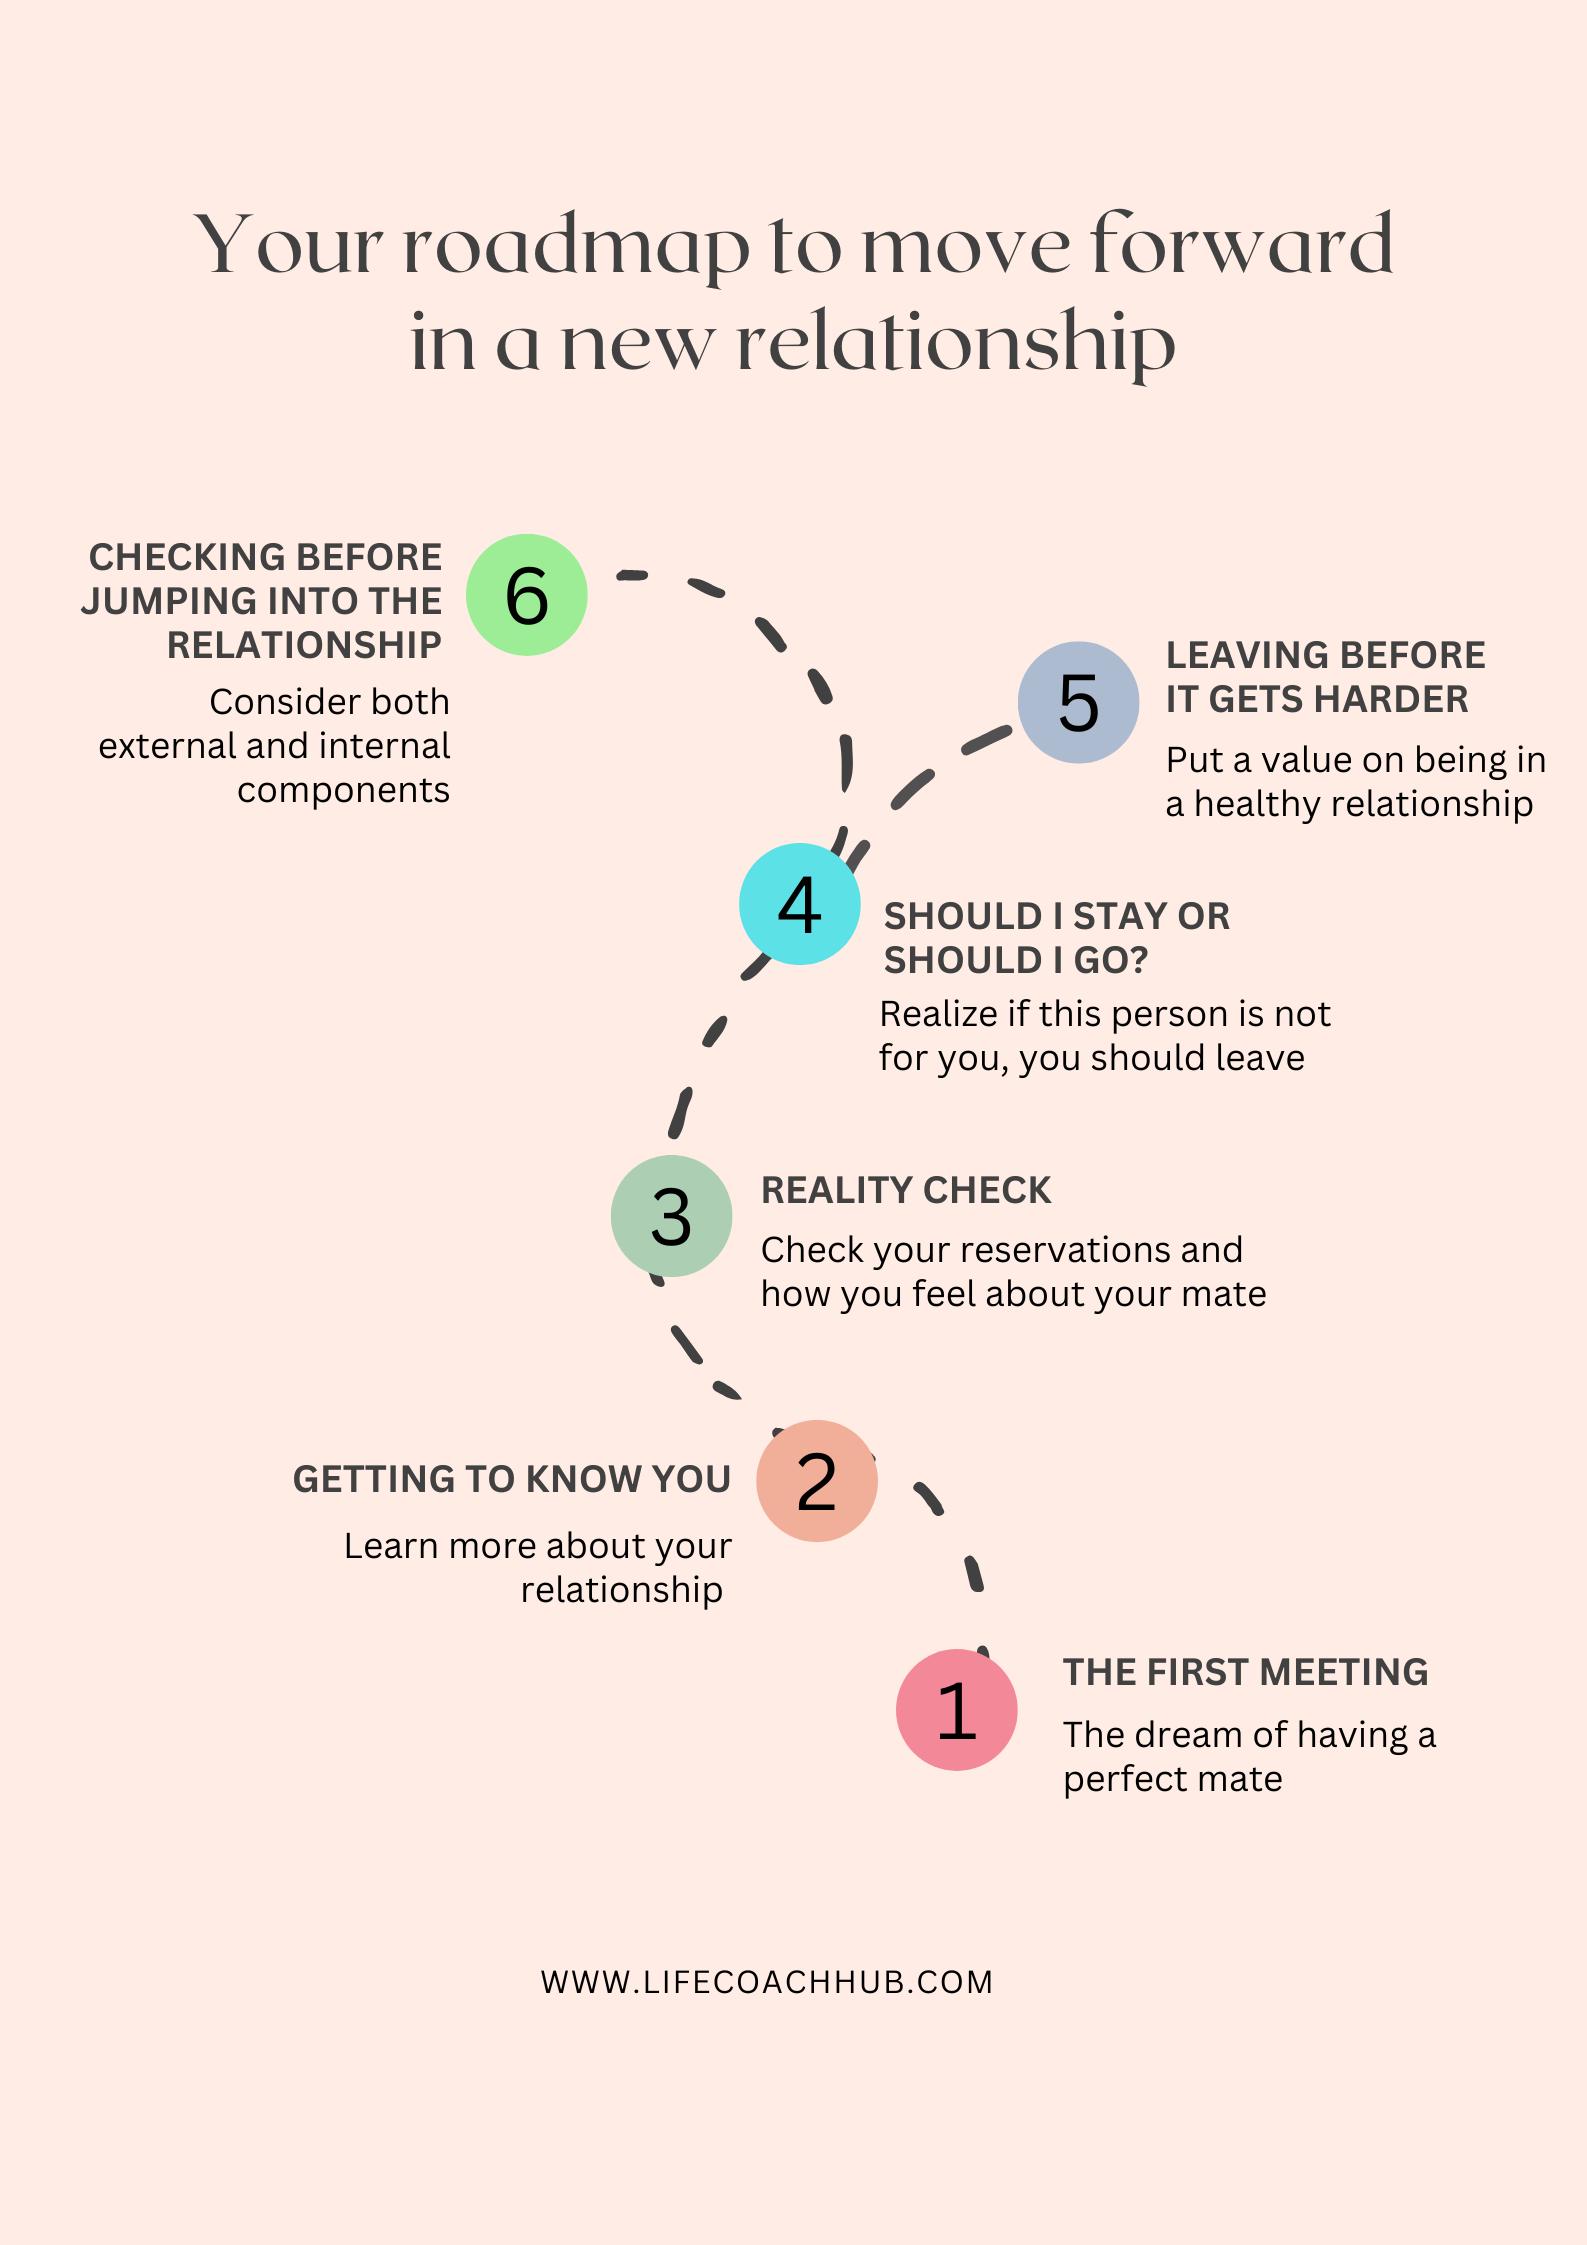 Your roadmap to move forward in a new relationship